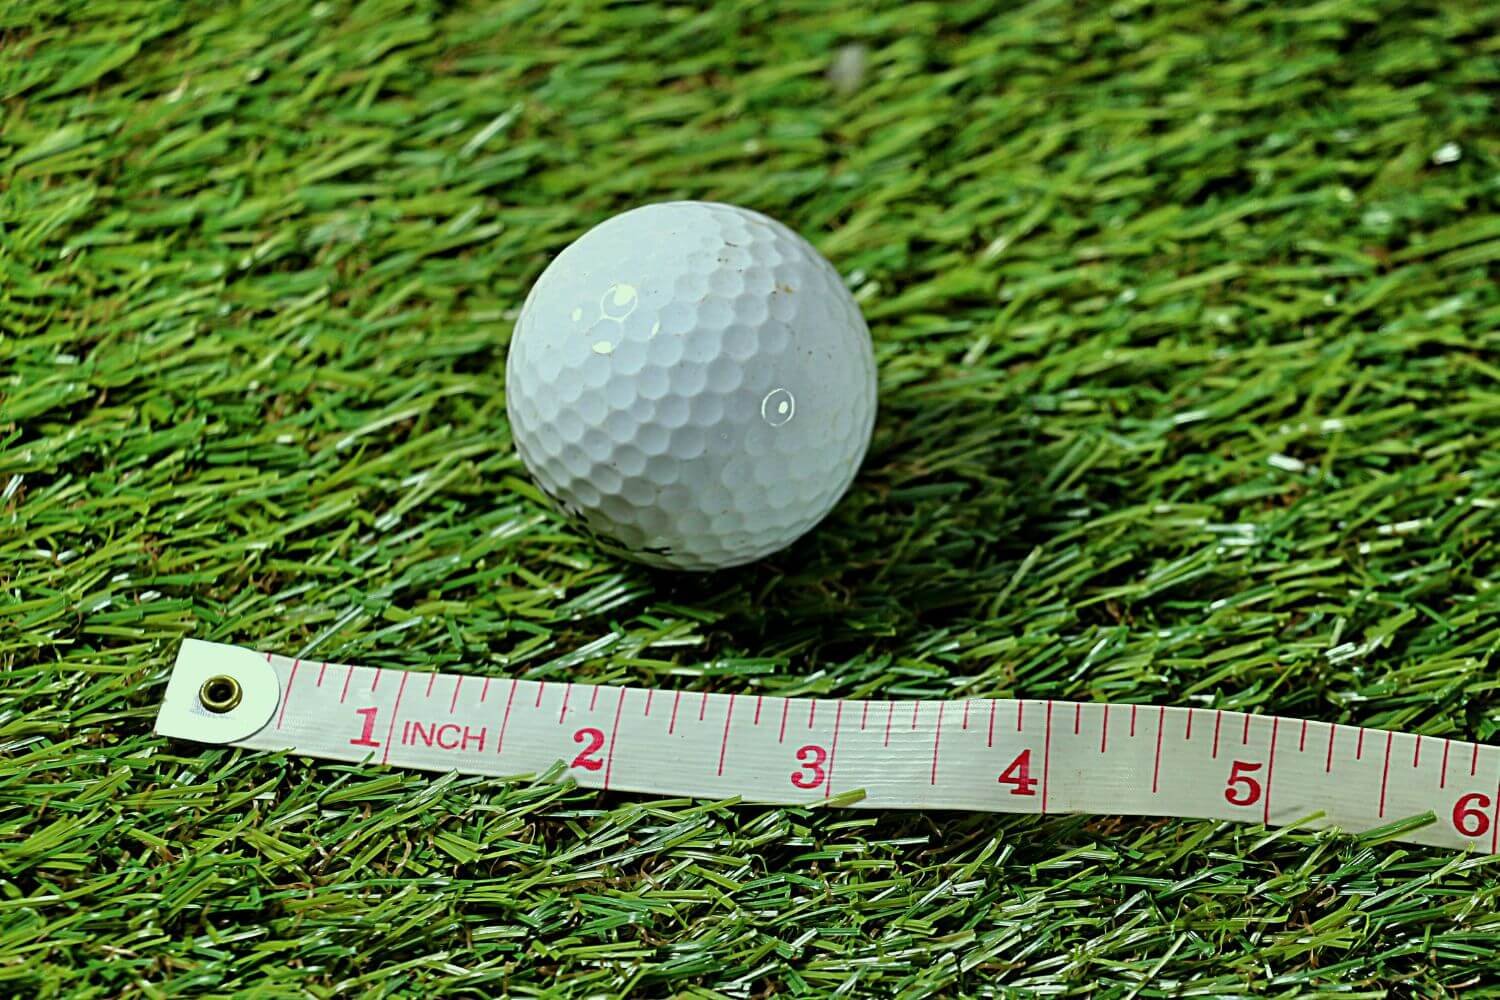 Golf Ball Size: Everything You Need To Know